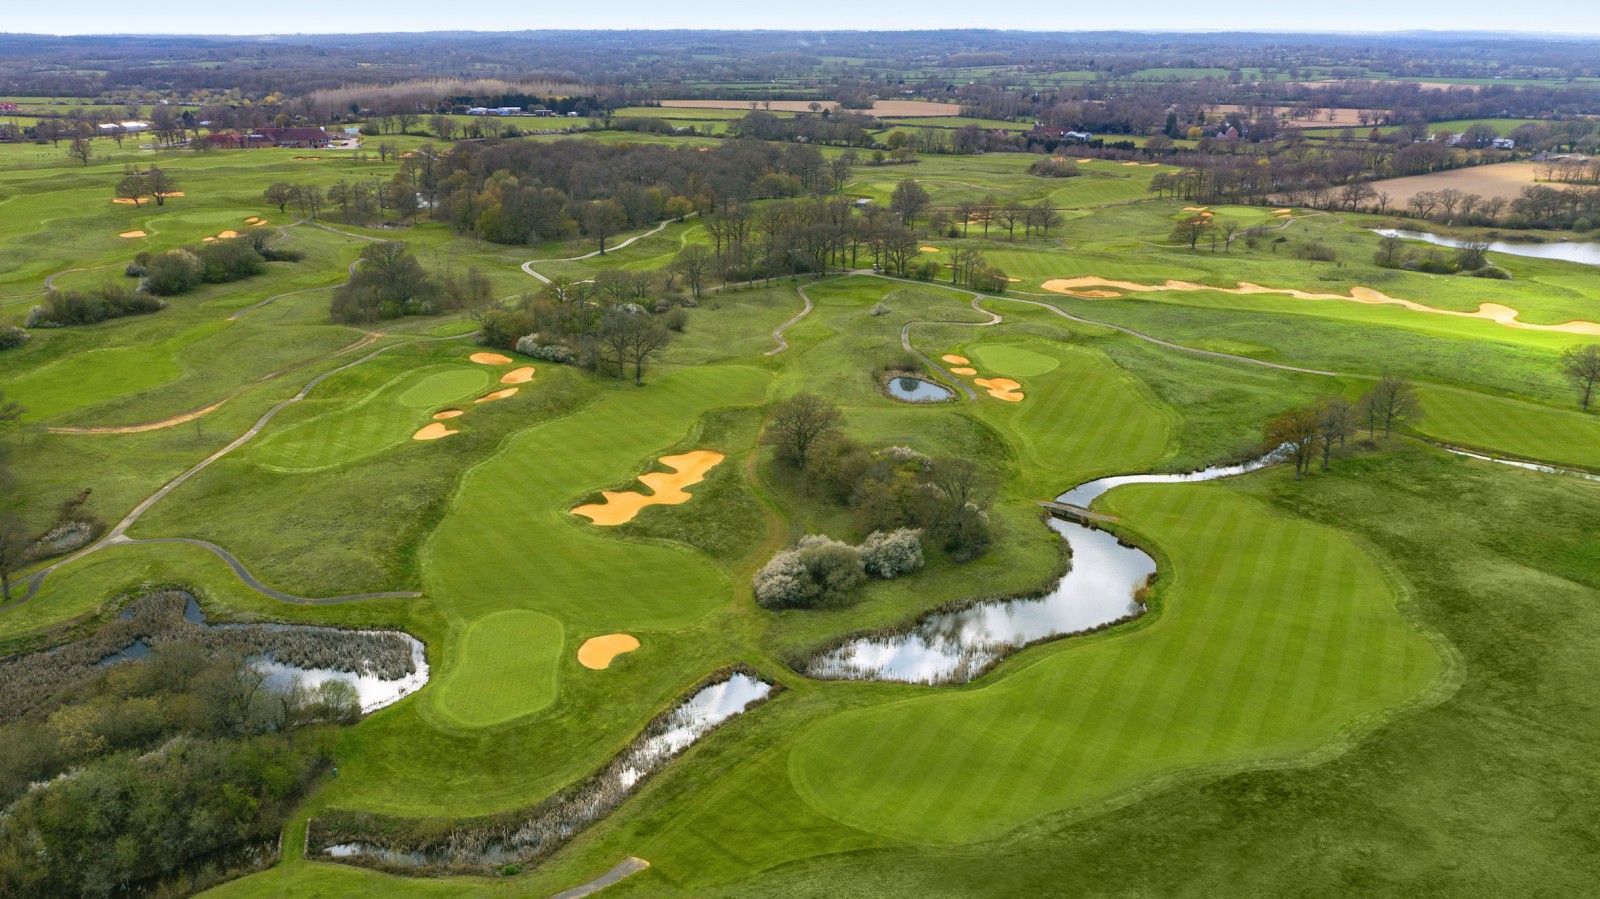 The PGA Kent Open is being staged at the recently renovated Chart Hills 